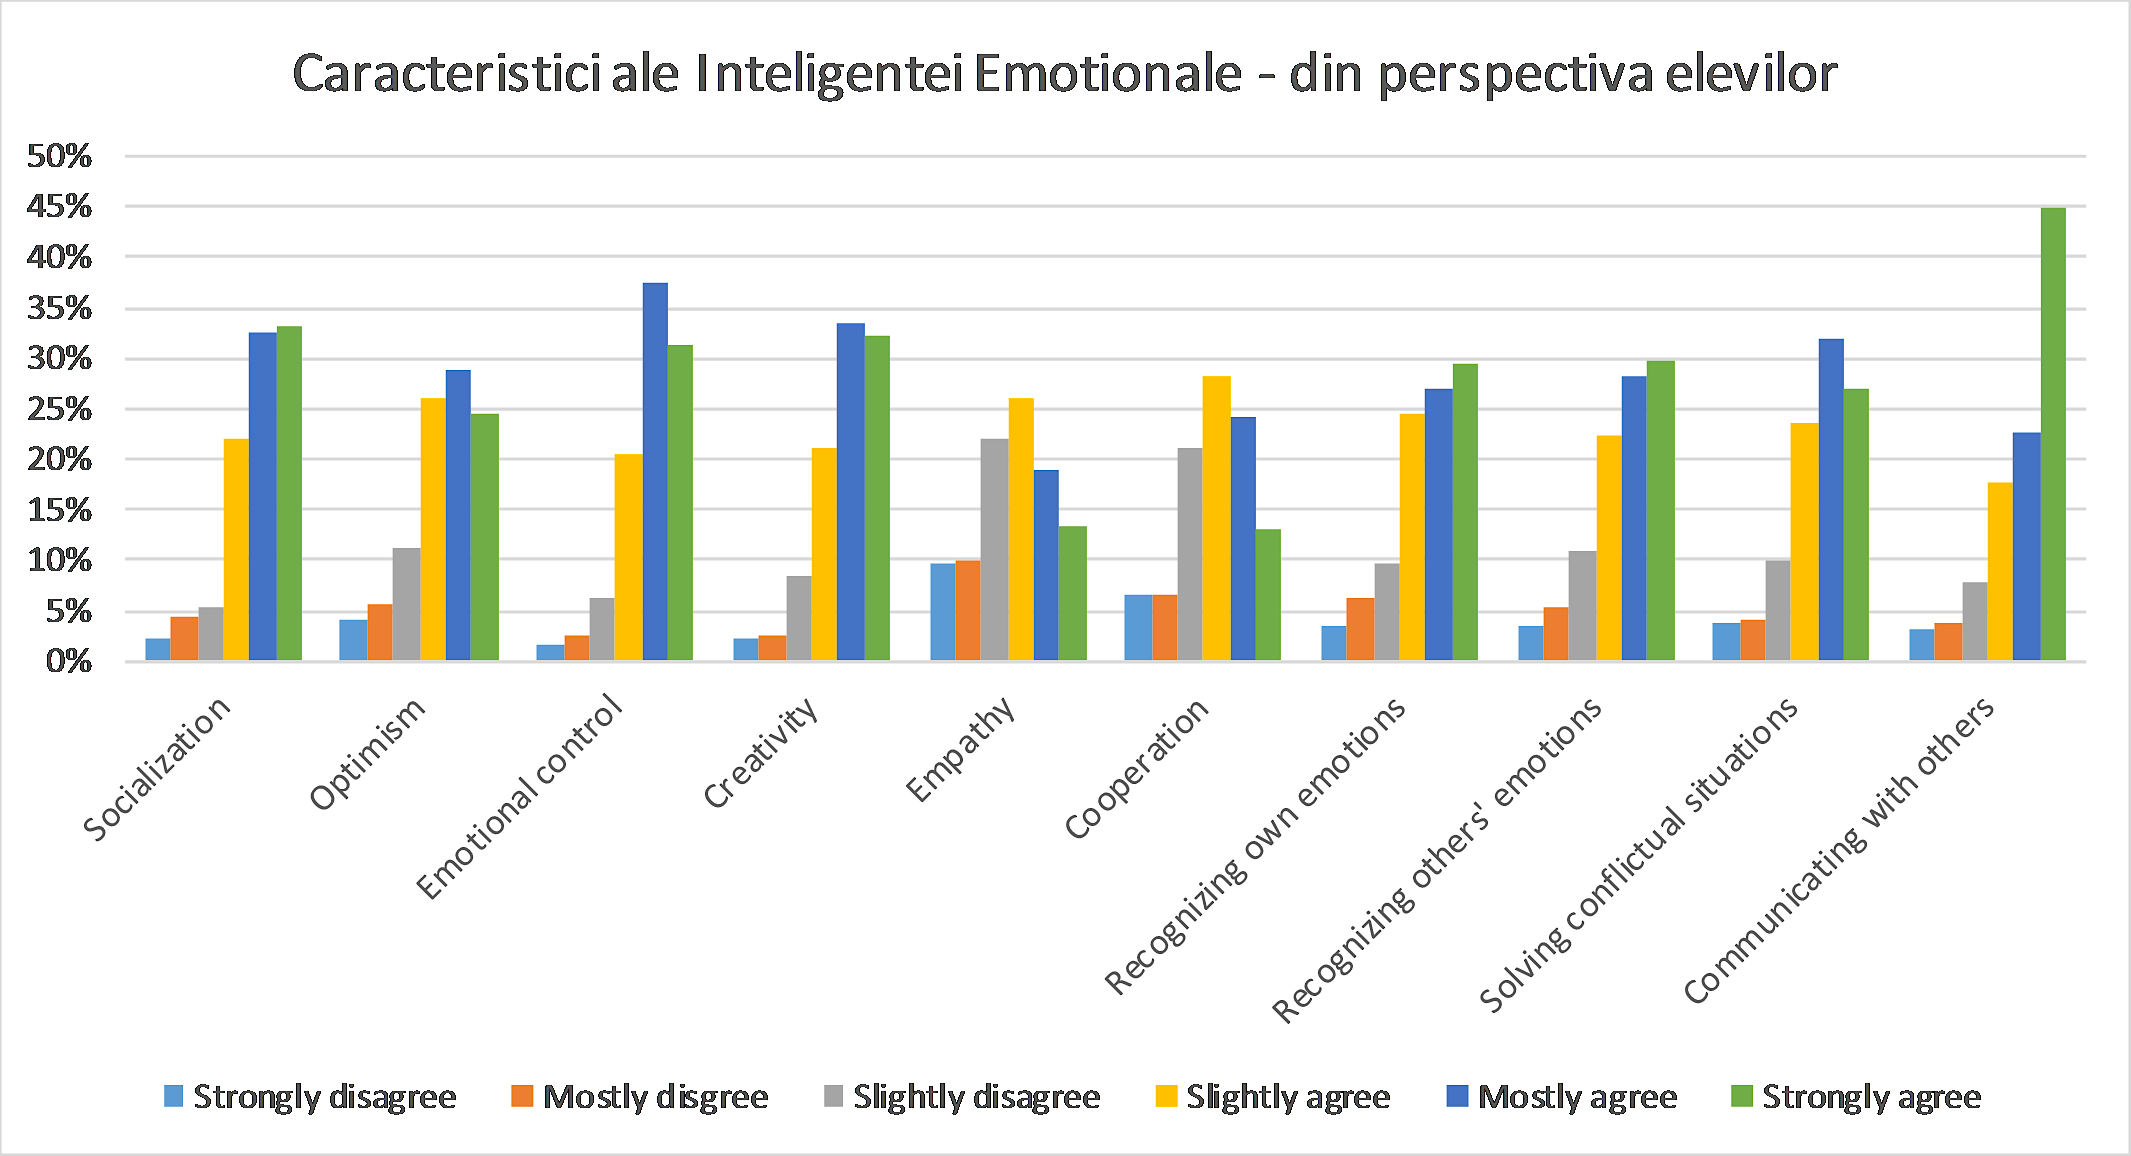 Characteristics of students’ emotional intelligence recognized at the level of their own personality